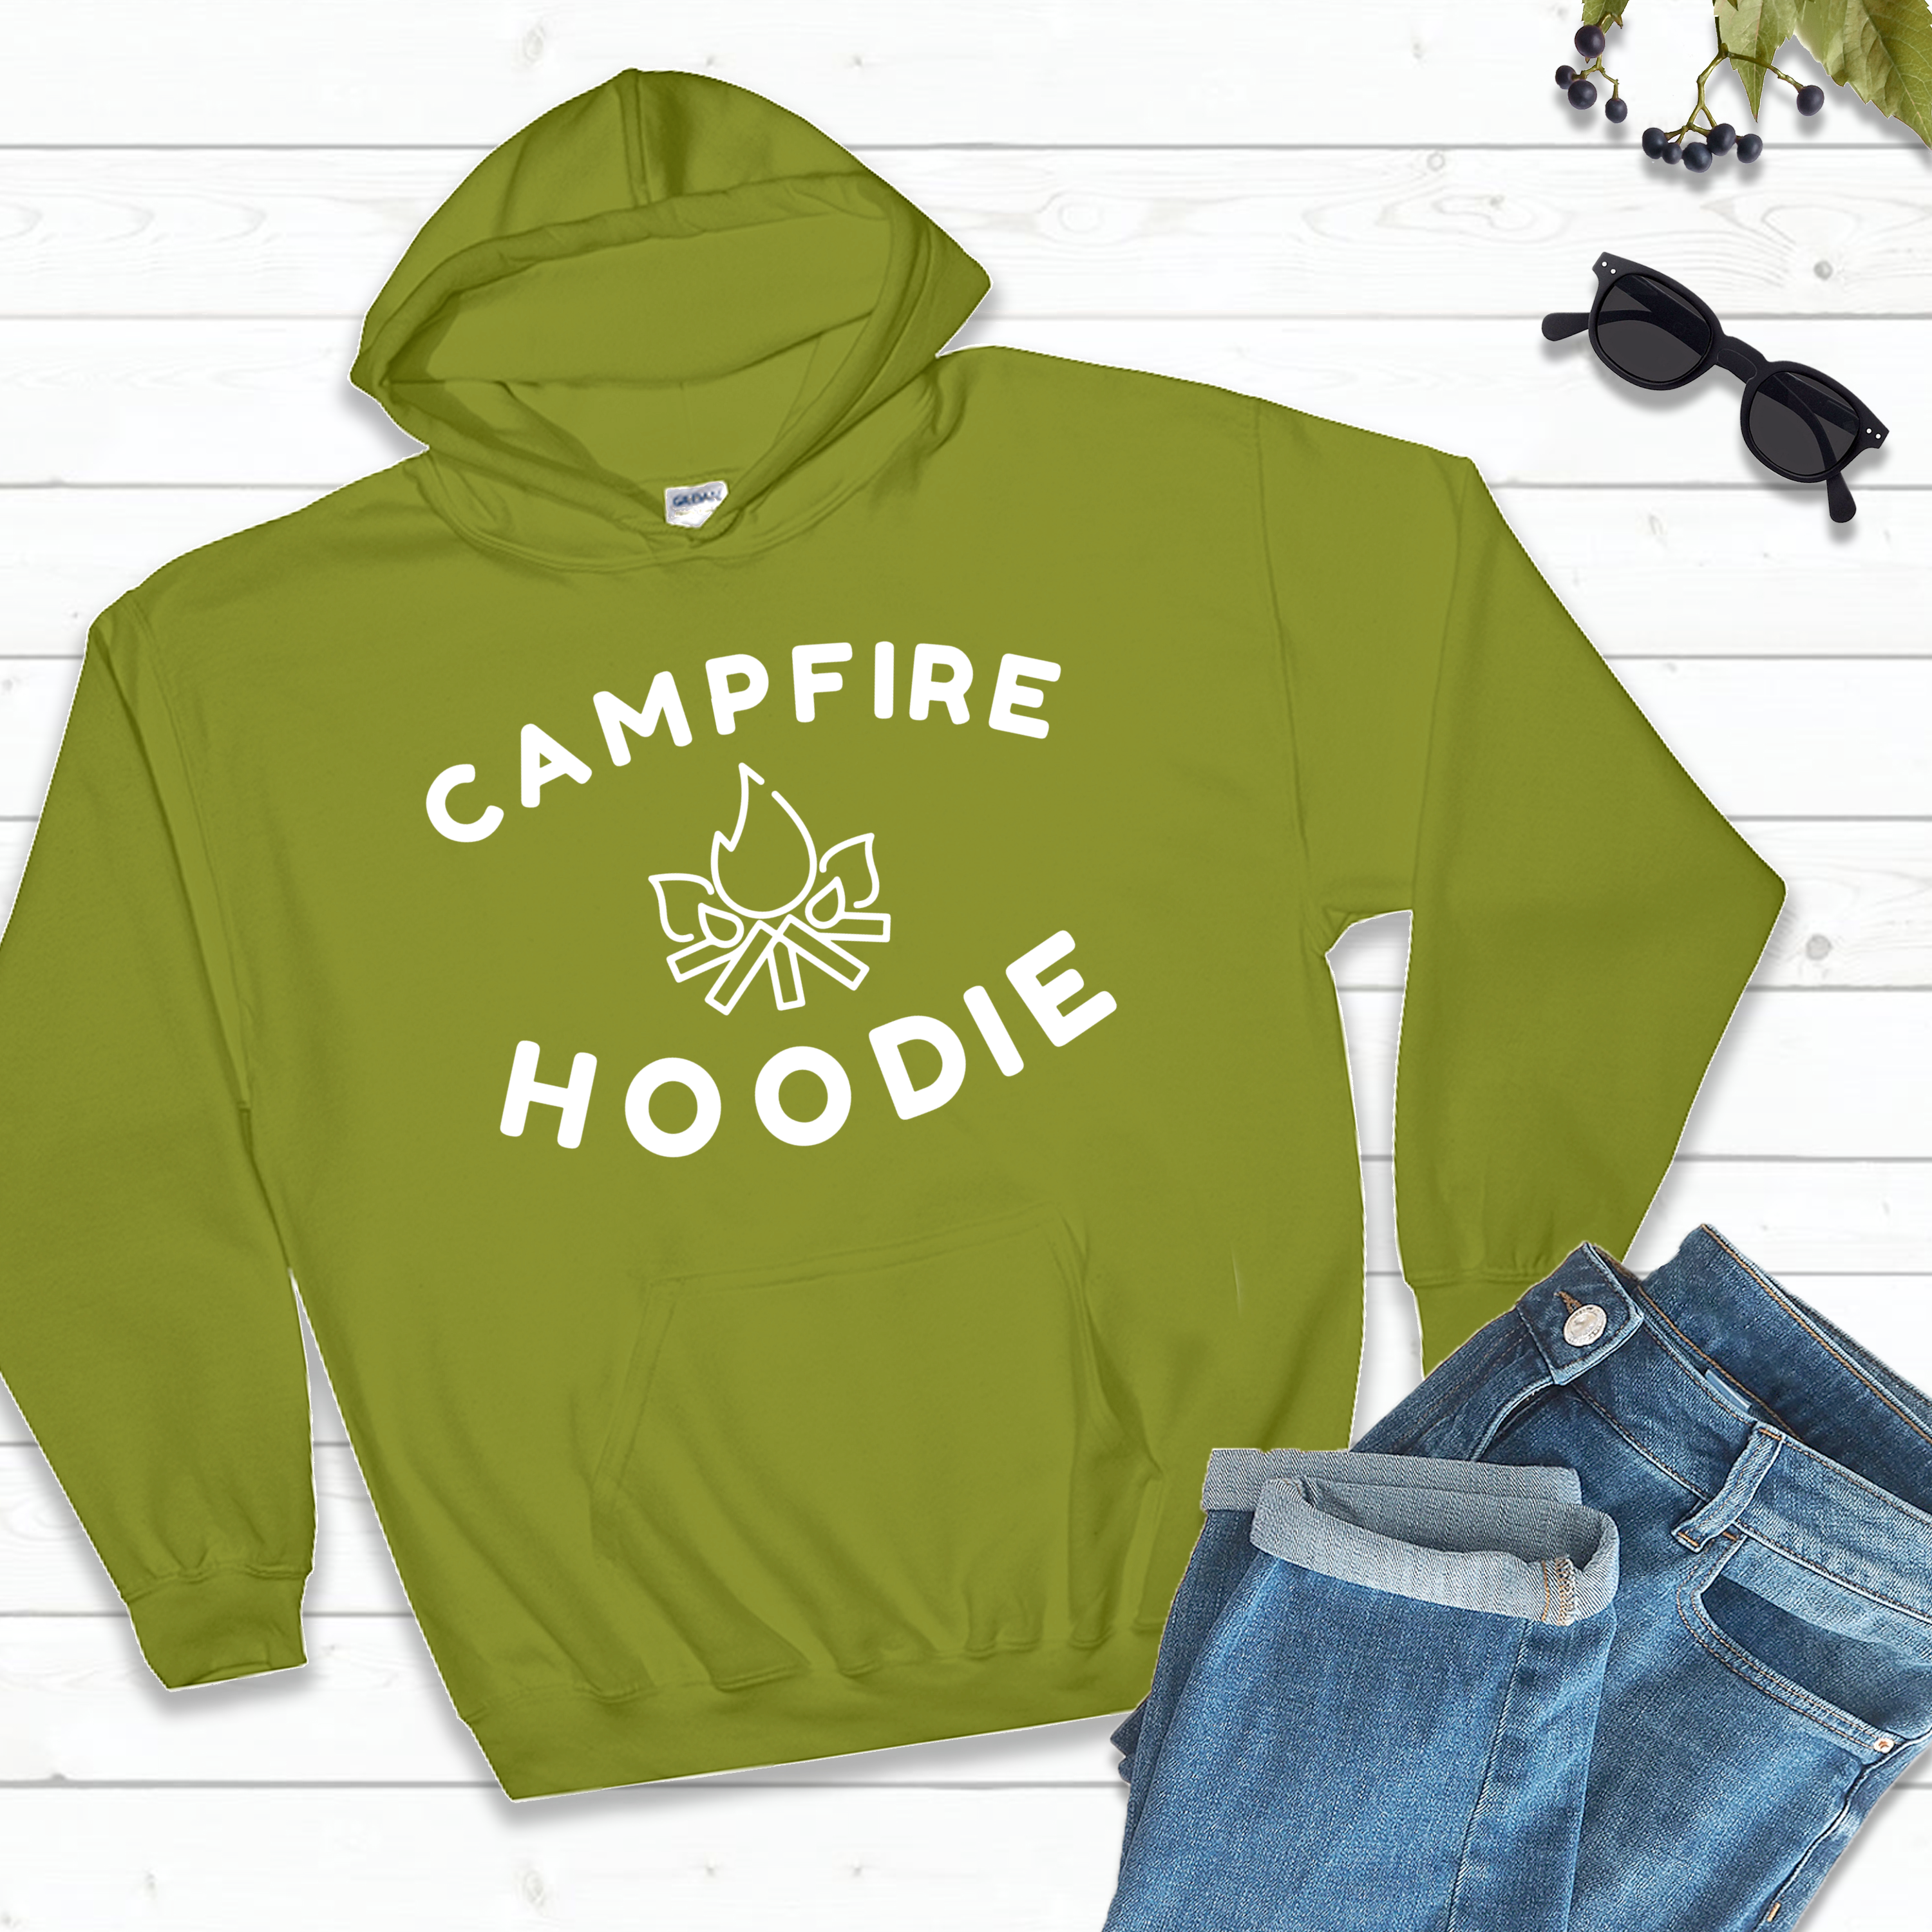 light green campfire hoodie, jeans, and sunglasses